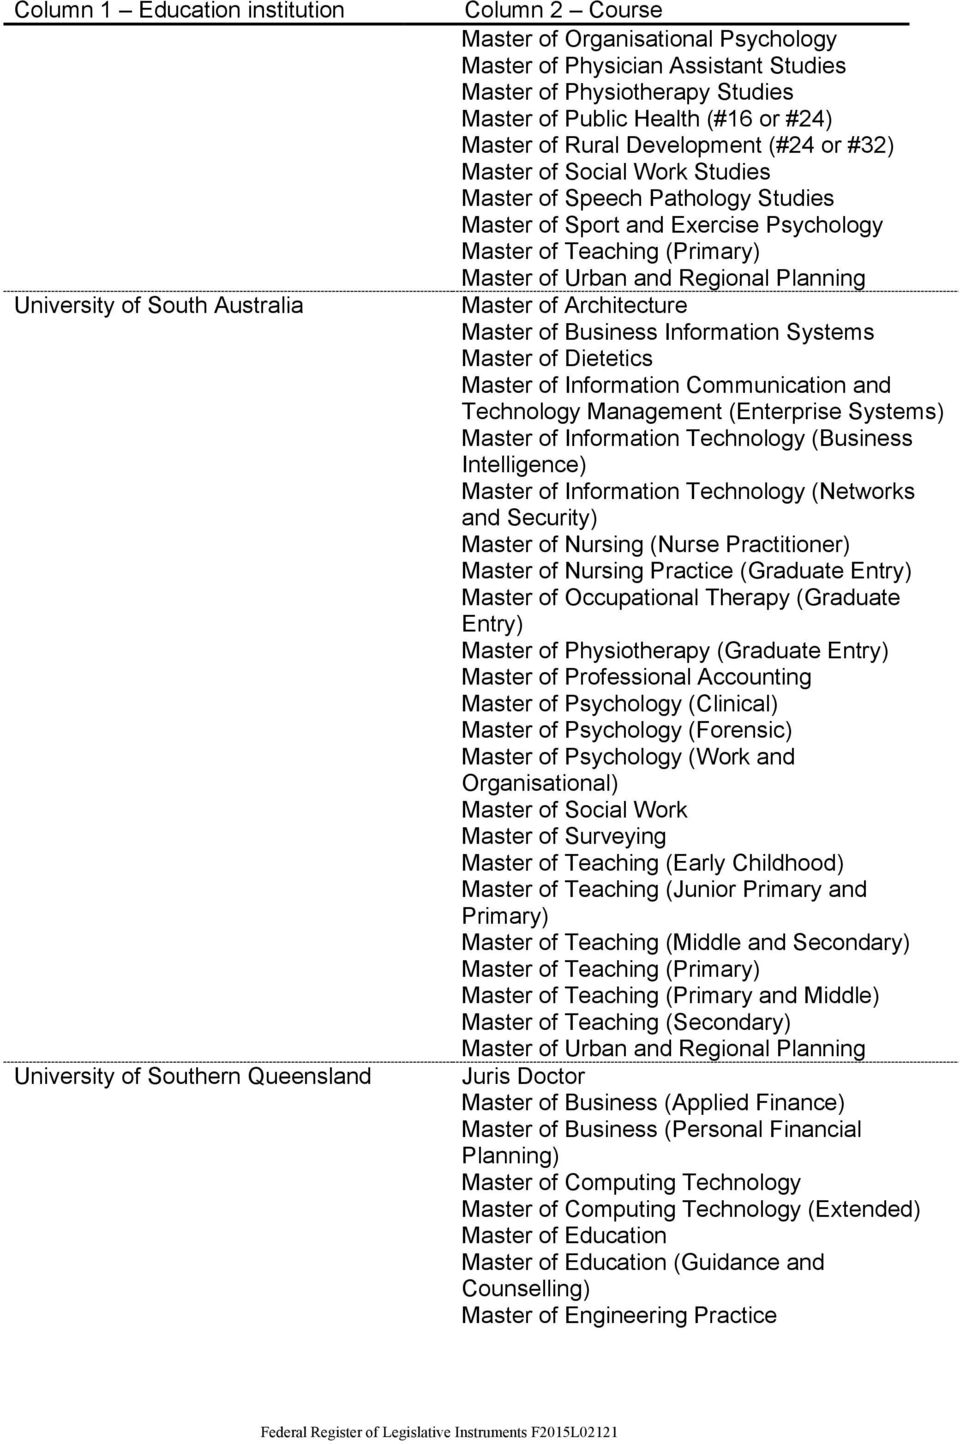 Systems Master of Dietetics Master of Information Communication and Technology Management (Enterprise Systems) (Business Intelligence) (Networks and Security) Master of Nursing (Nurse Practitioner)